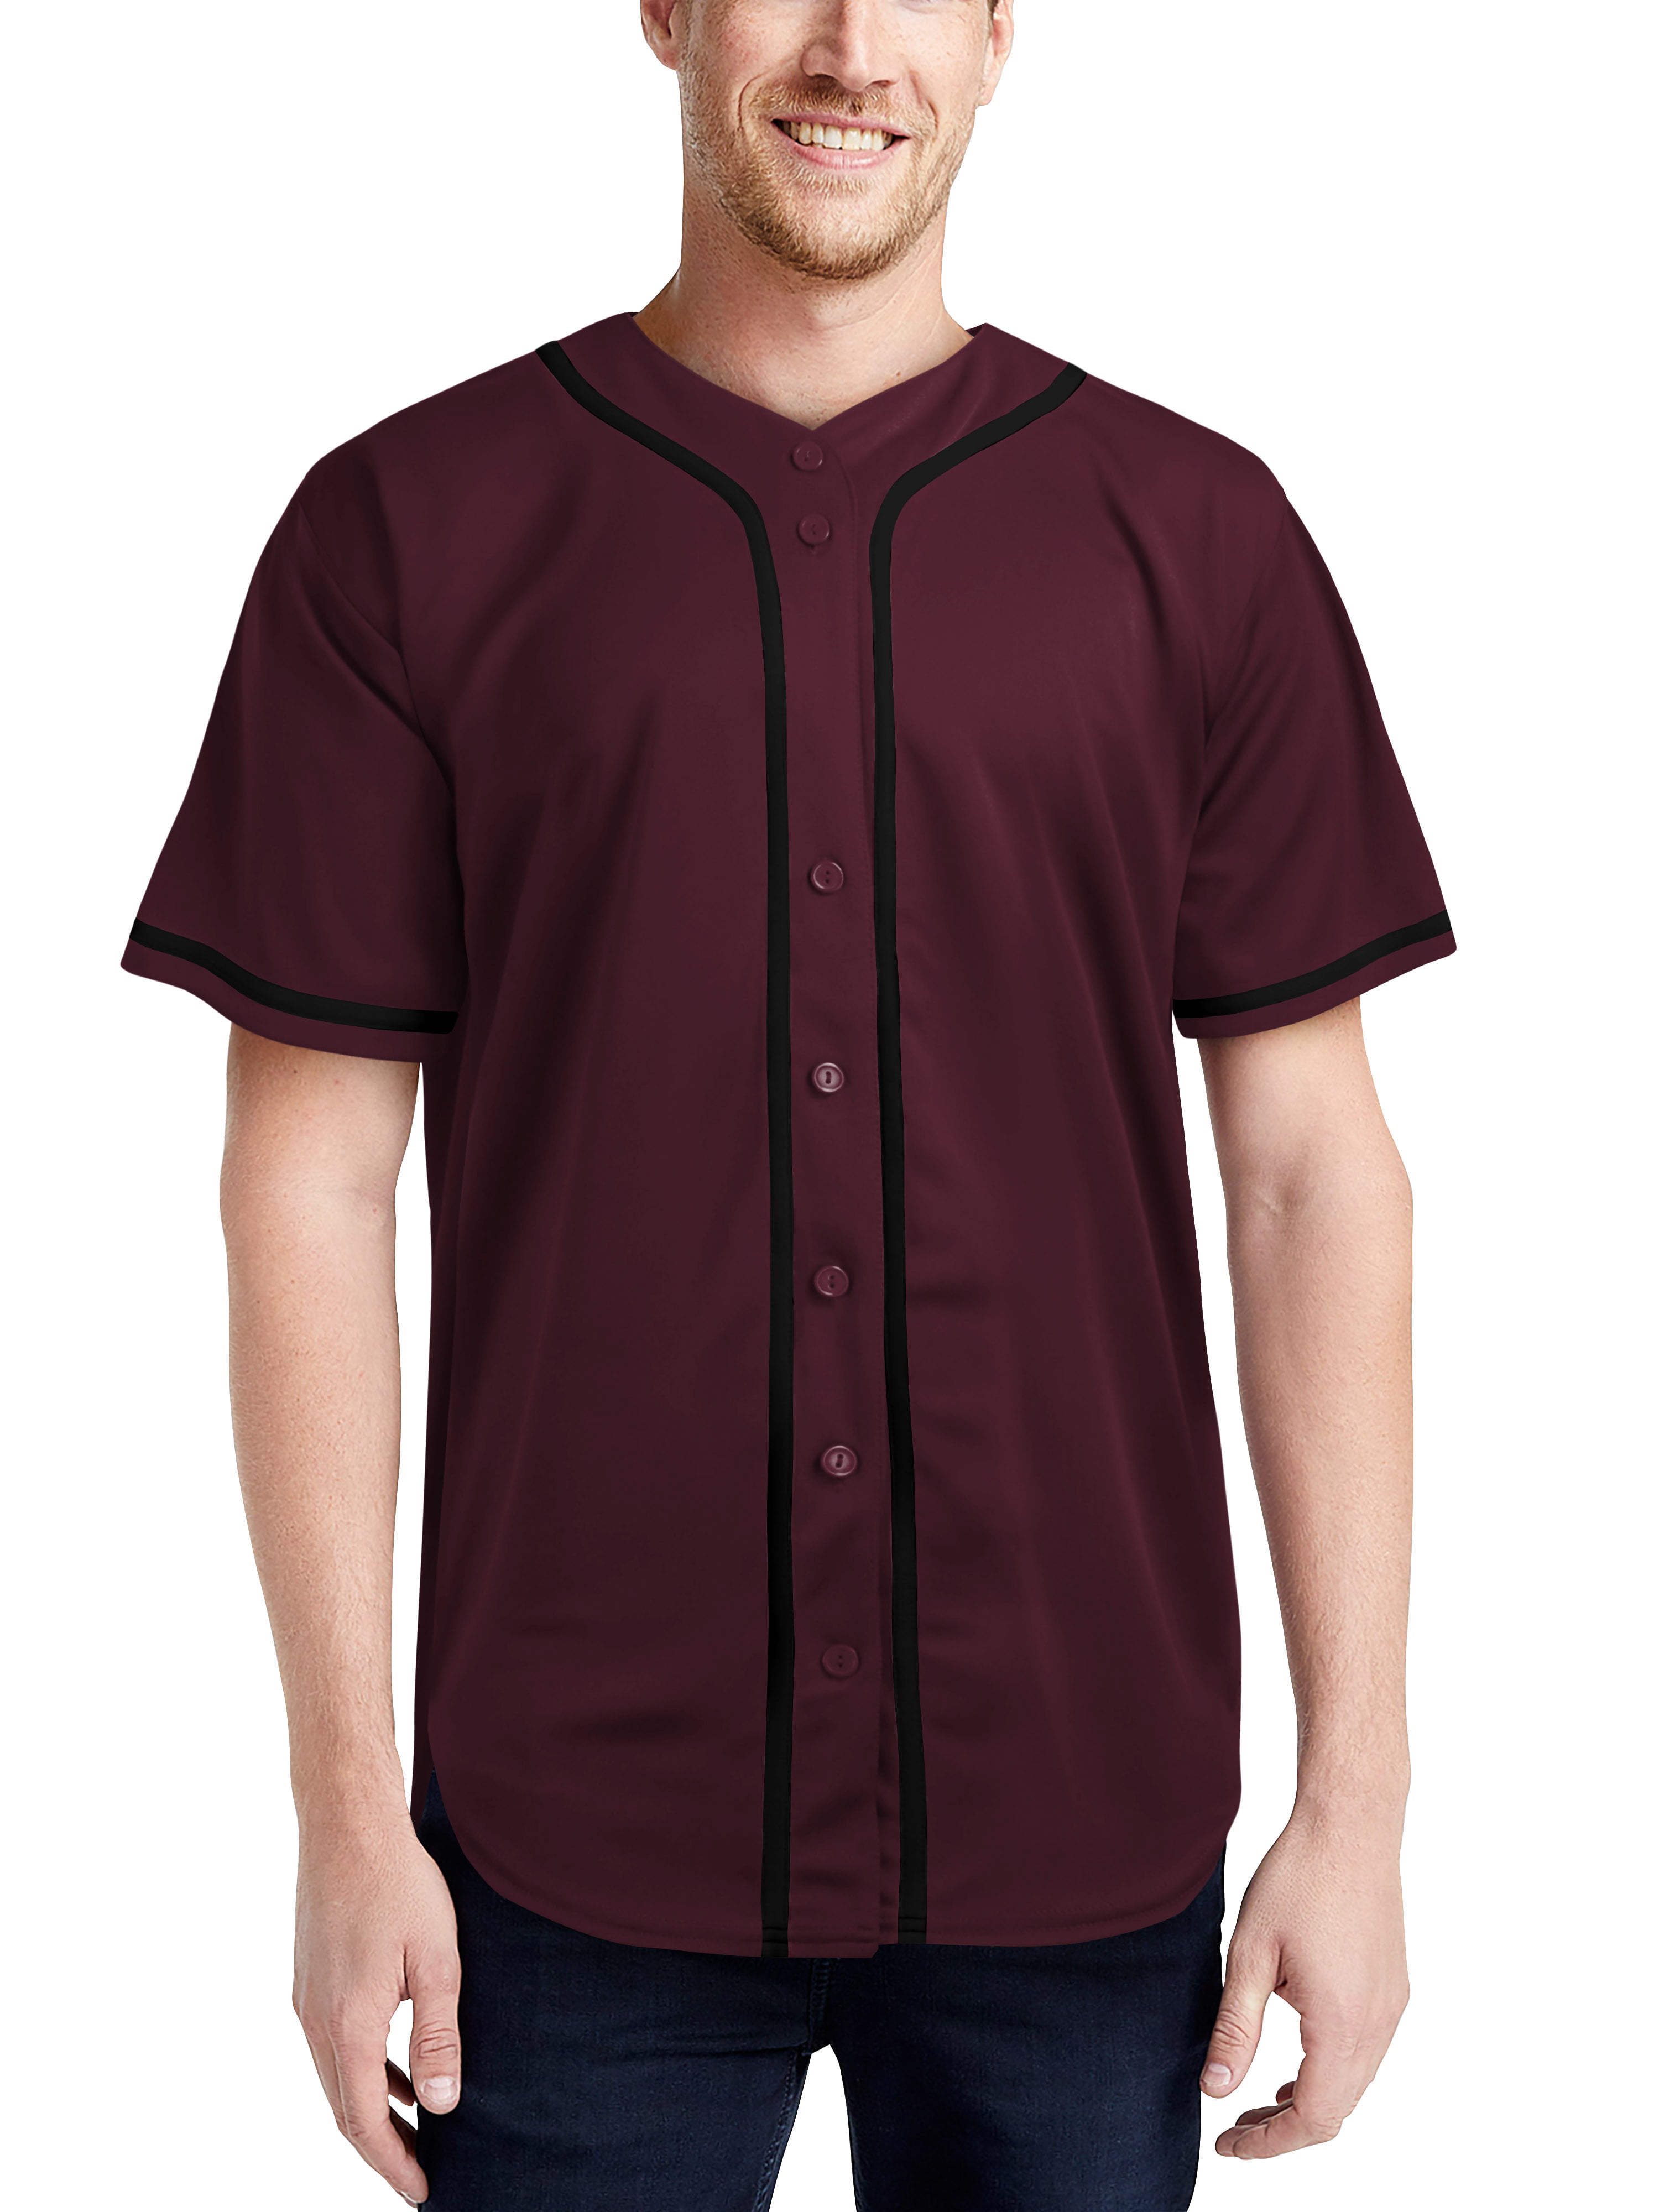 Hat and Beyond Mens Active Baseball Jersey Button Down Shirts Team Sports Uniforms 